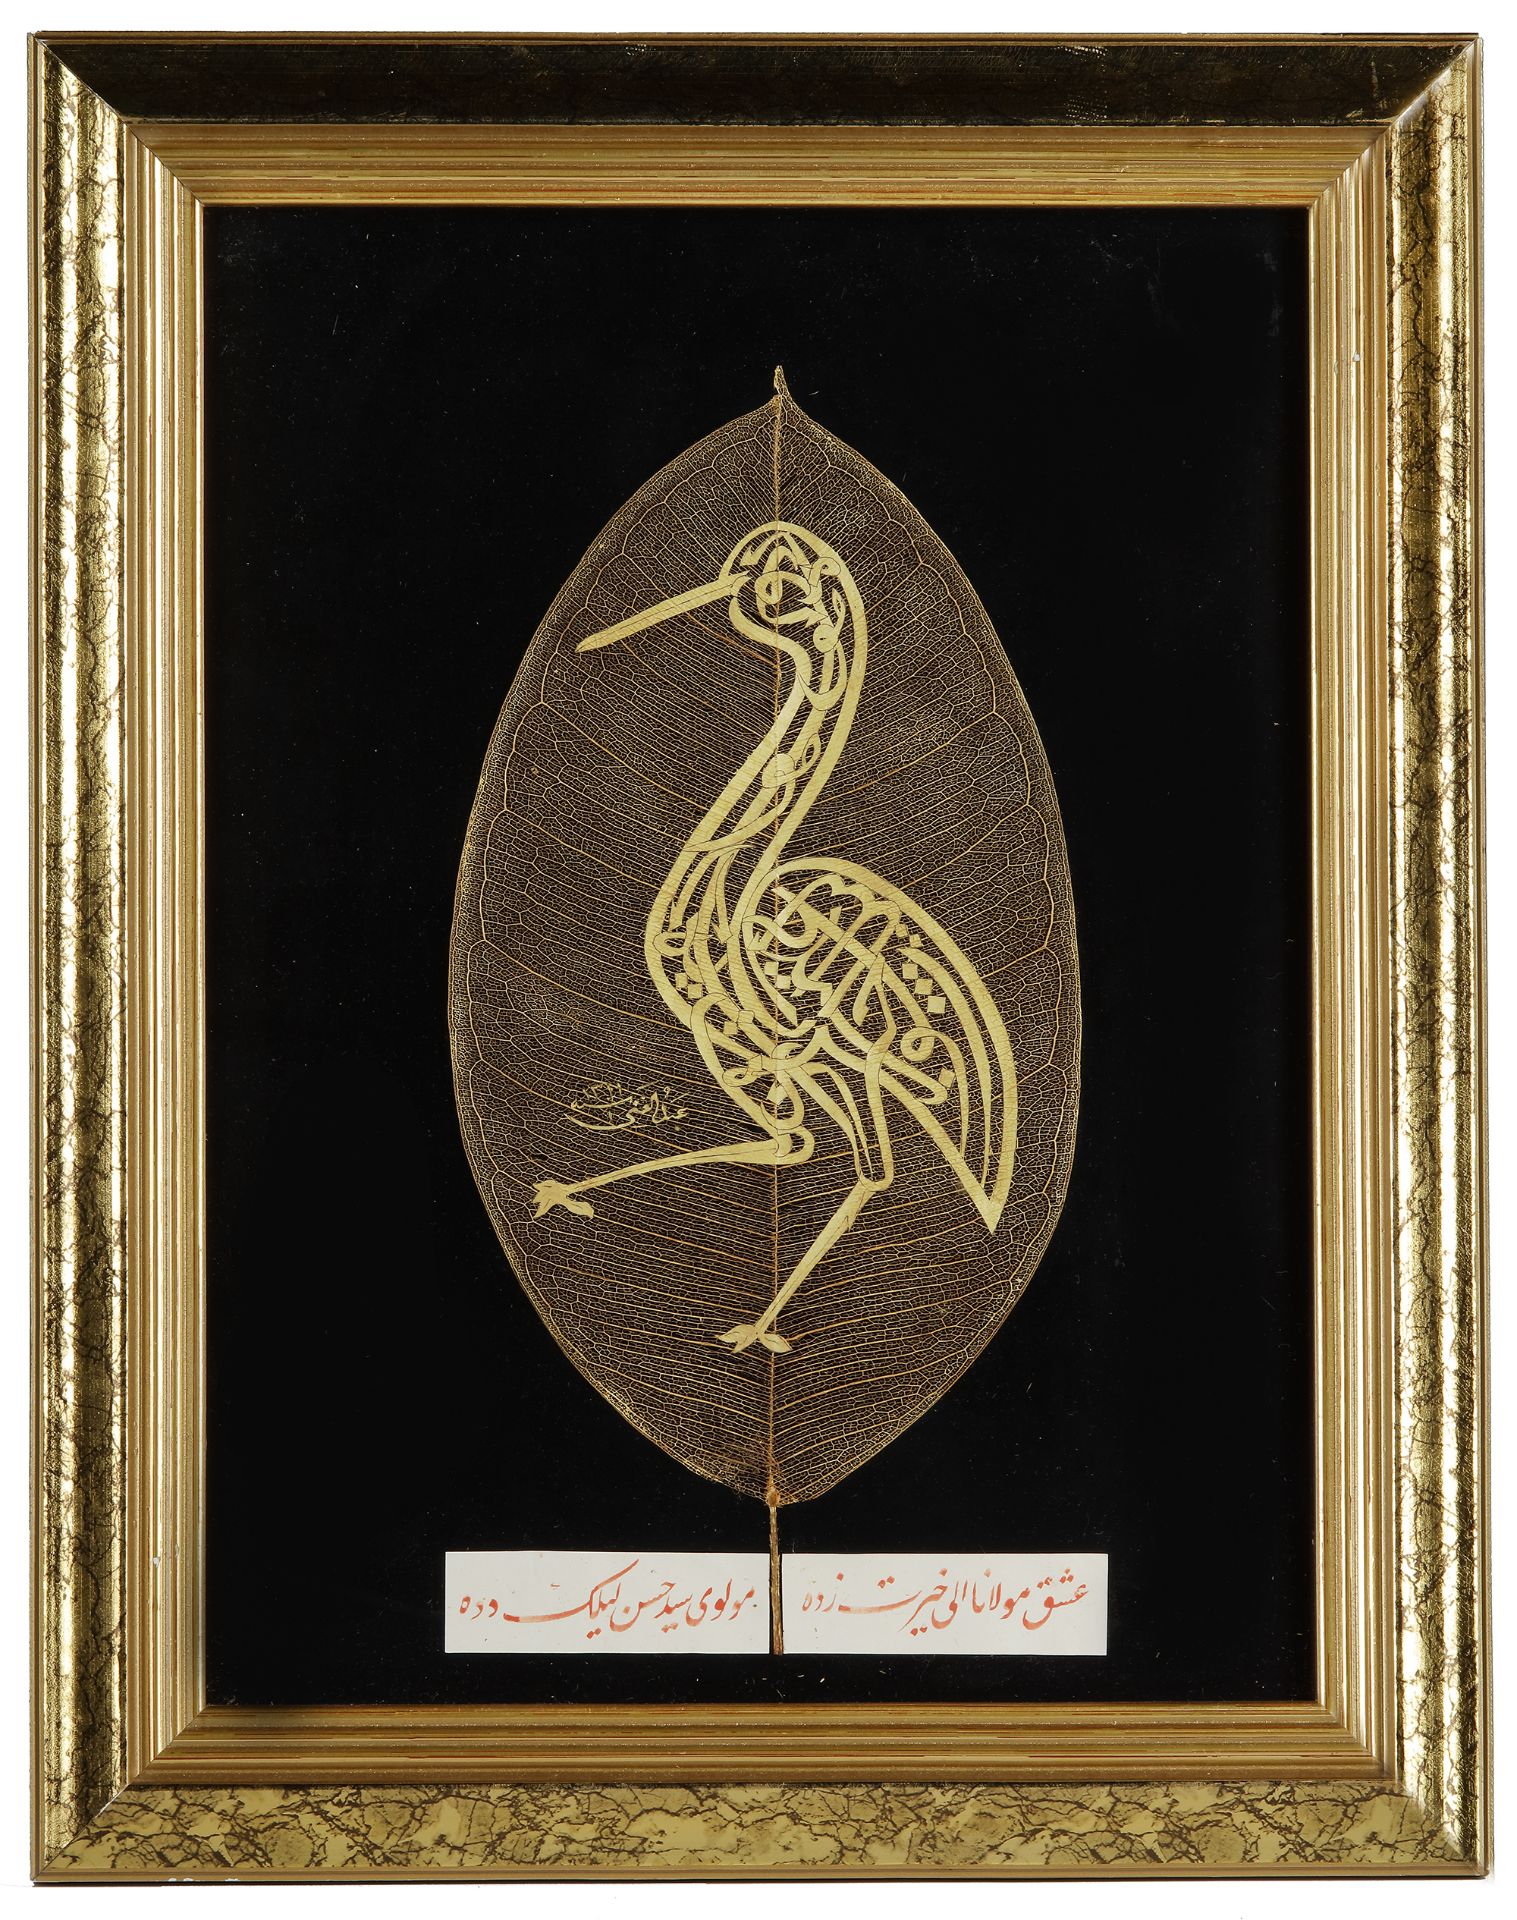 CALLIGRAPHIC COMPOSITIONS ON NATURAL LEAF, TURKEY, 19TH-20TH CENTURY - Image 2 of 2